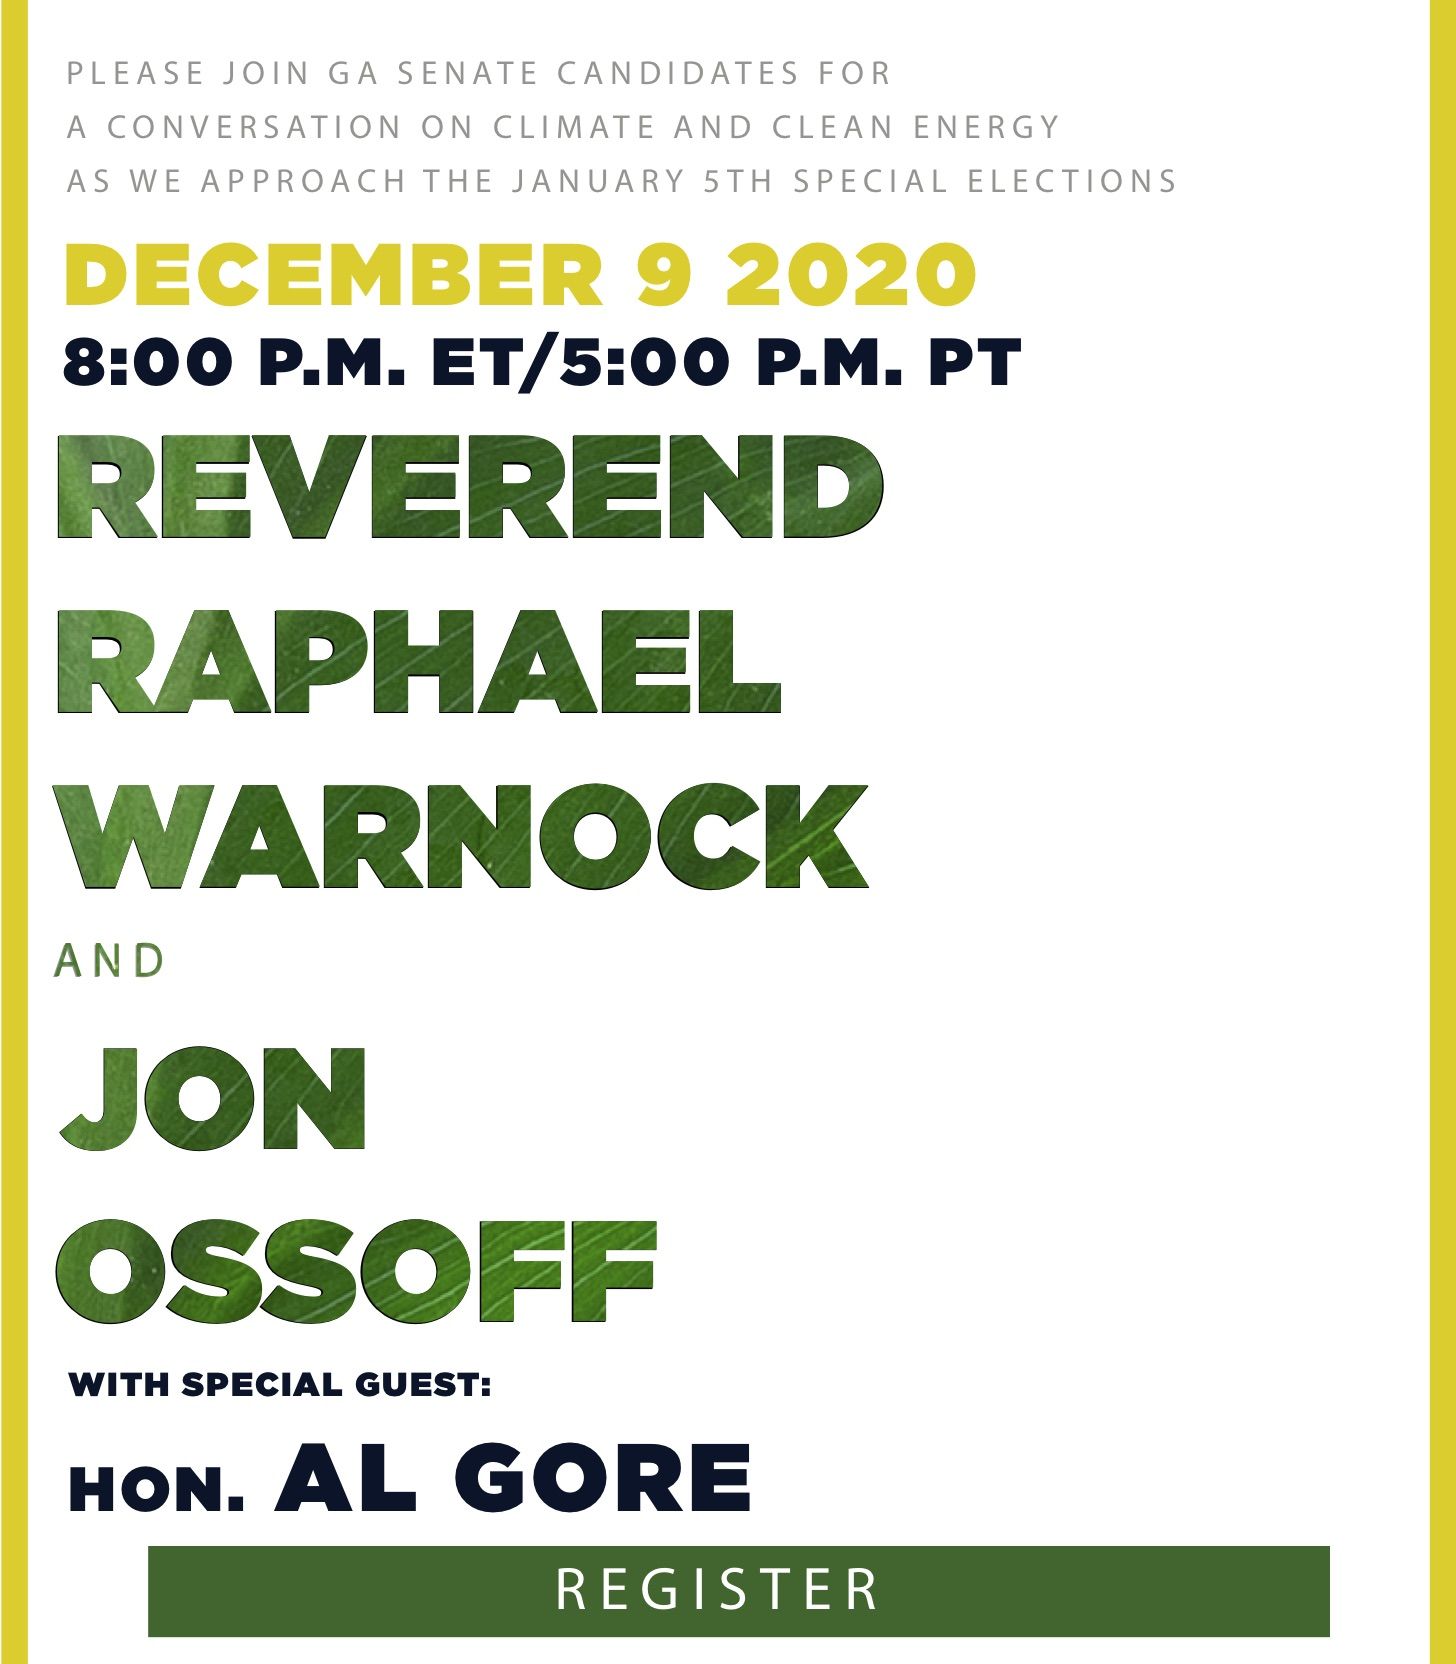 Please join GA Senate candidates for a conversation on climate and clean energy as we approach the January 5th special elections